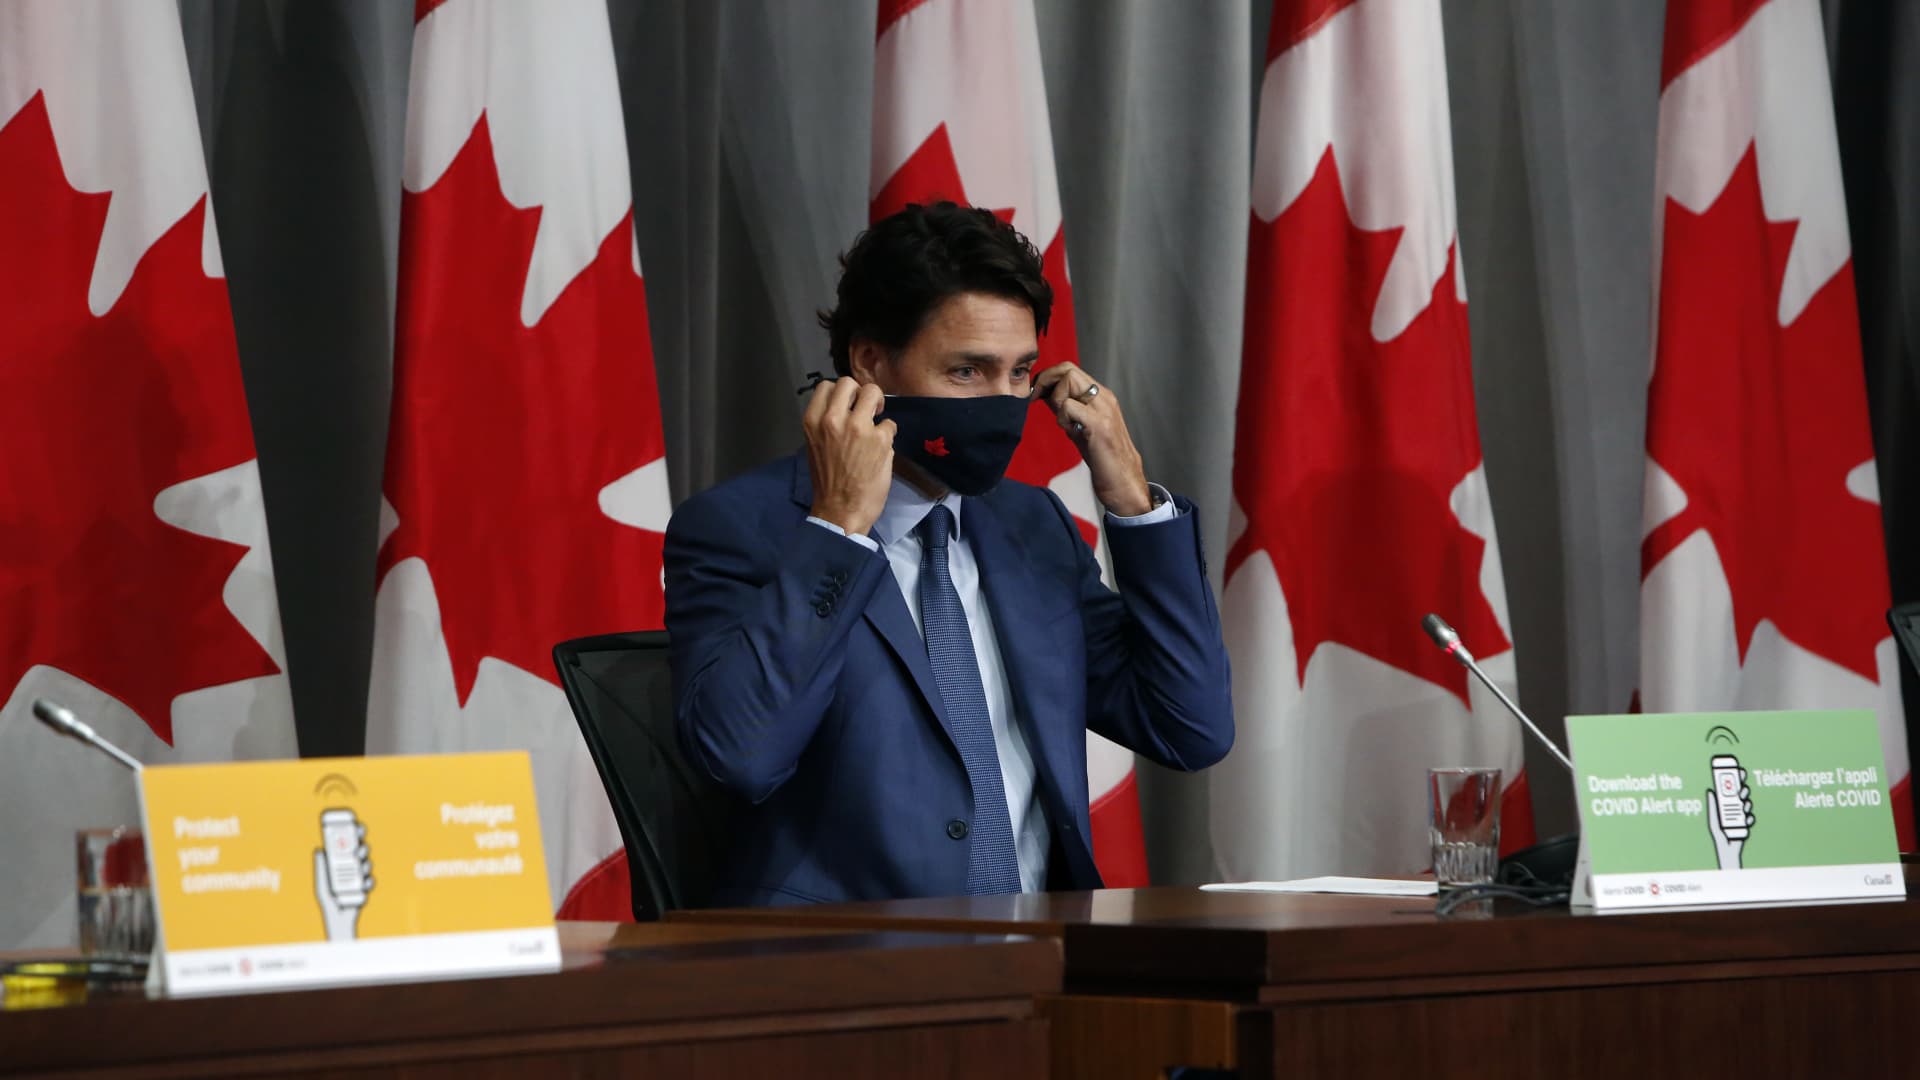 Justin Trudeau, Canada's prime minister, puts on a protective mask after a news conference in Ottawa, Ontario, Canada, on Friday, Sept. 25, 2020.